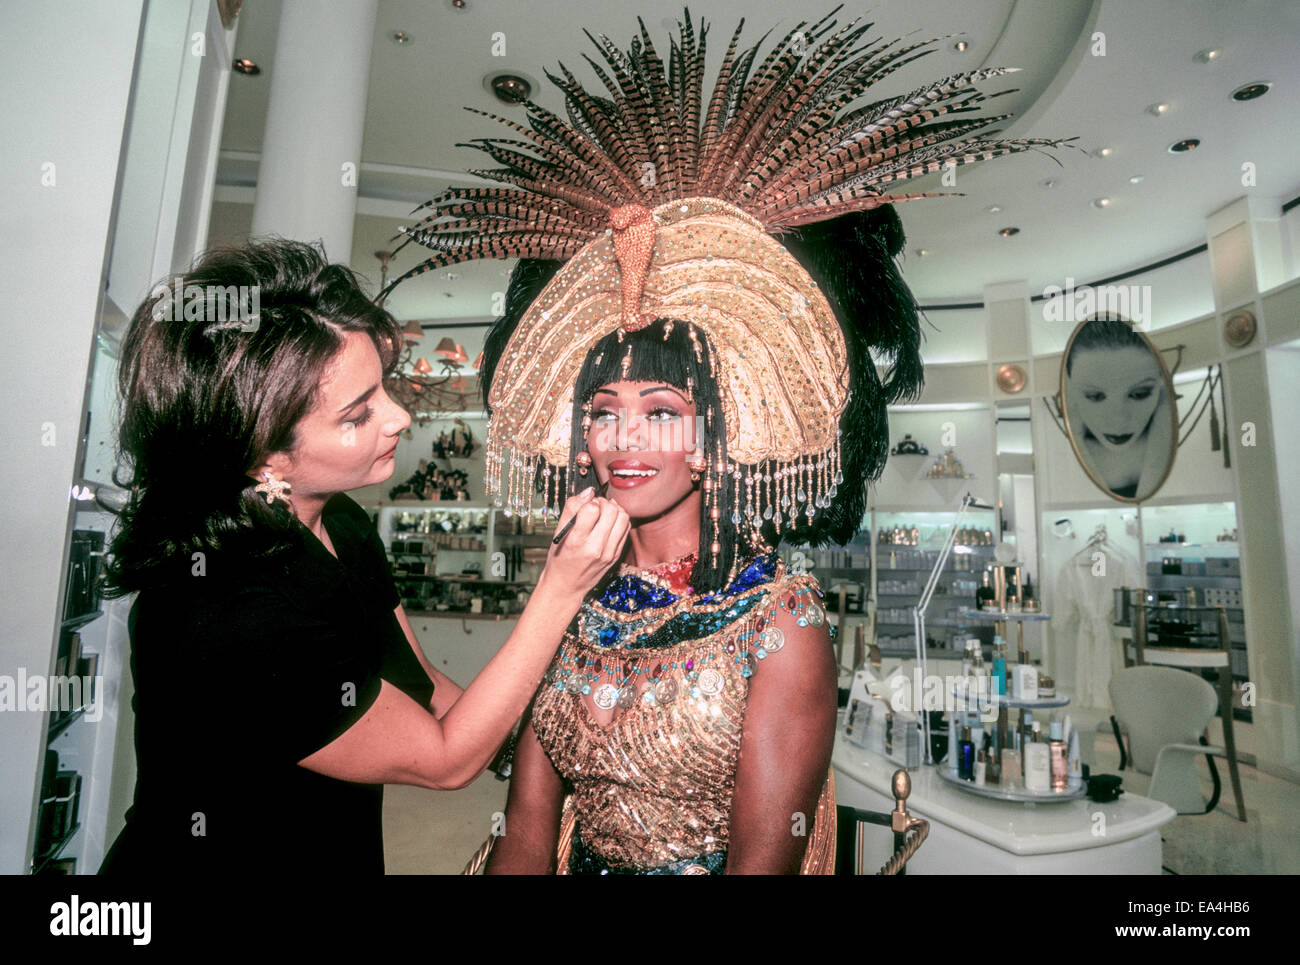 Estee lauder hi-res stock photography and images - Alamy